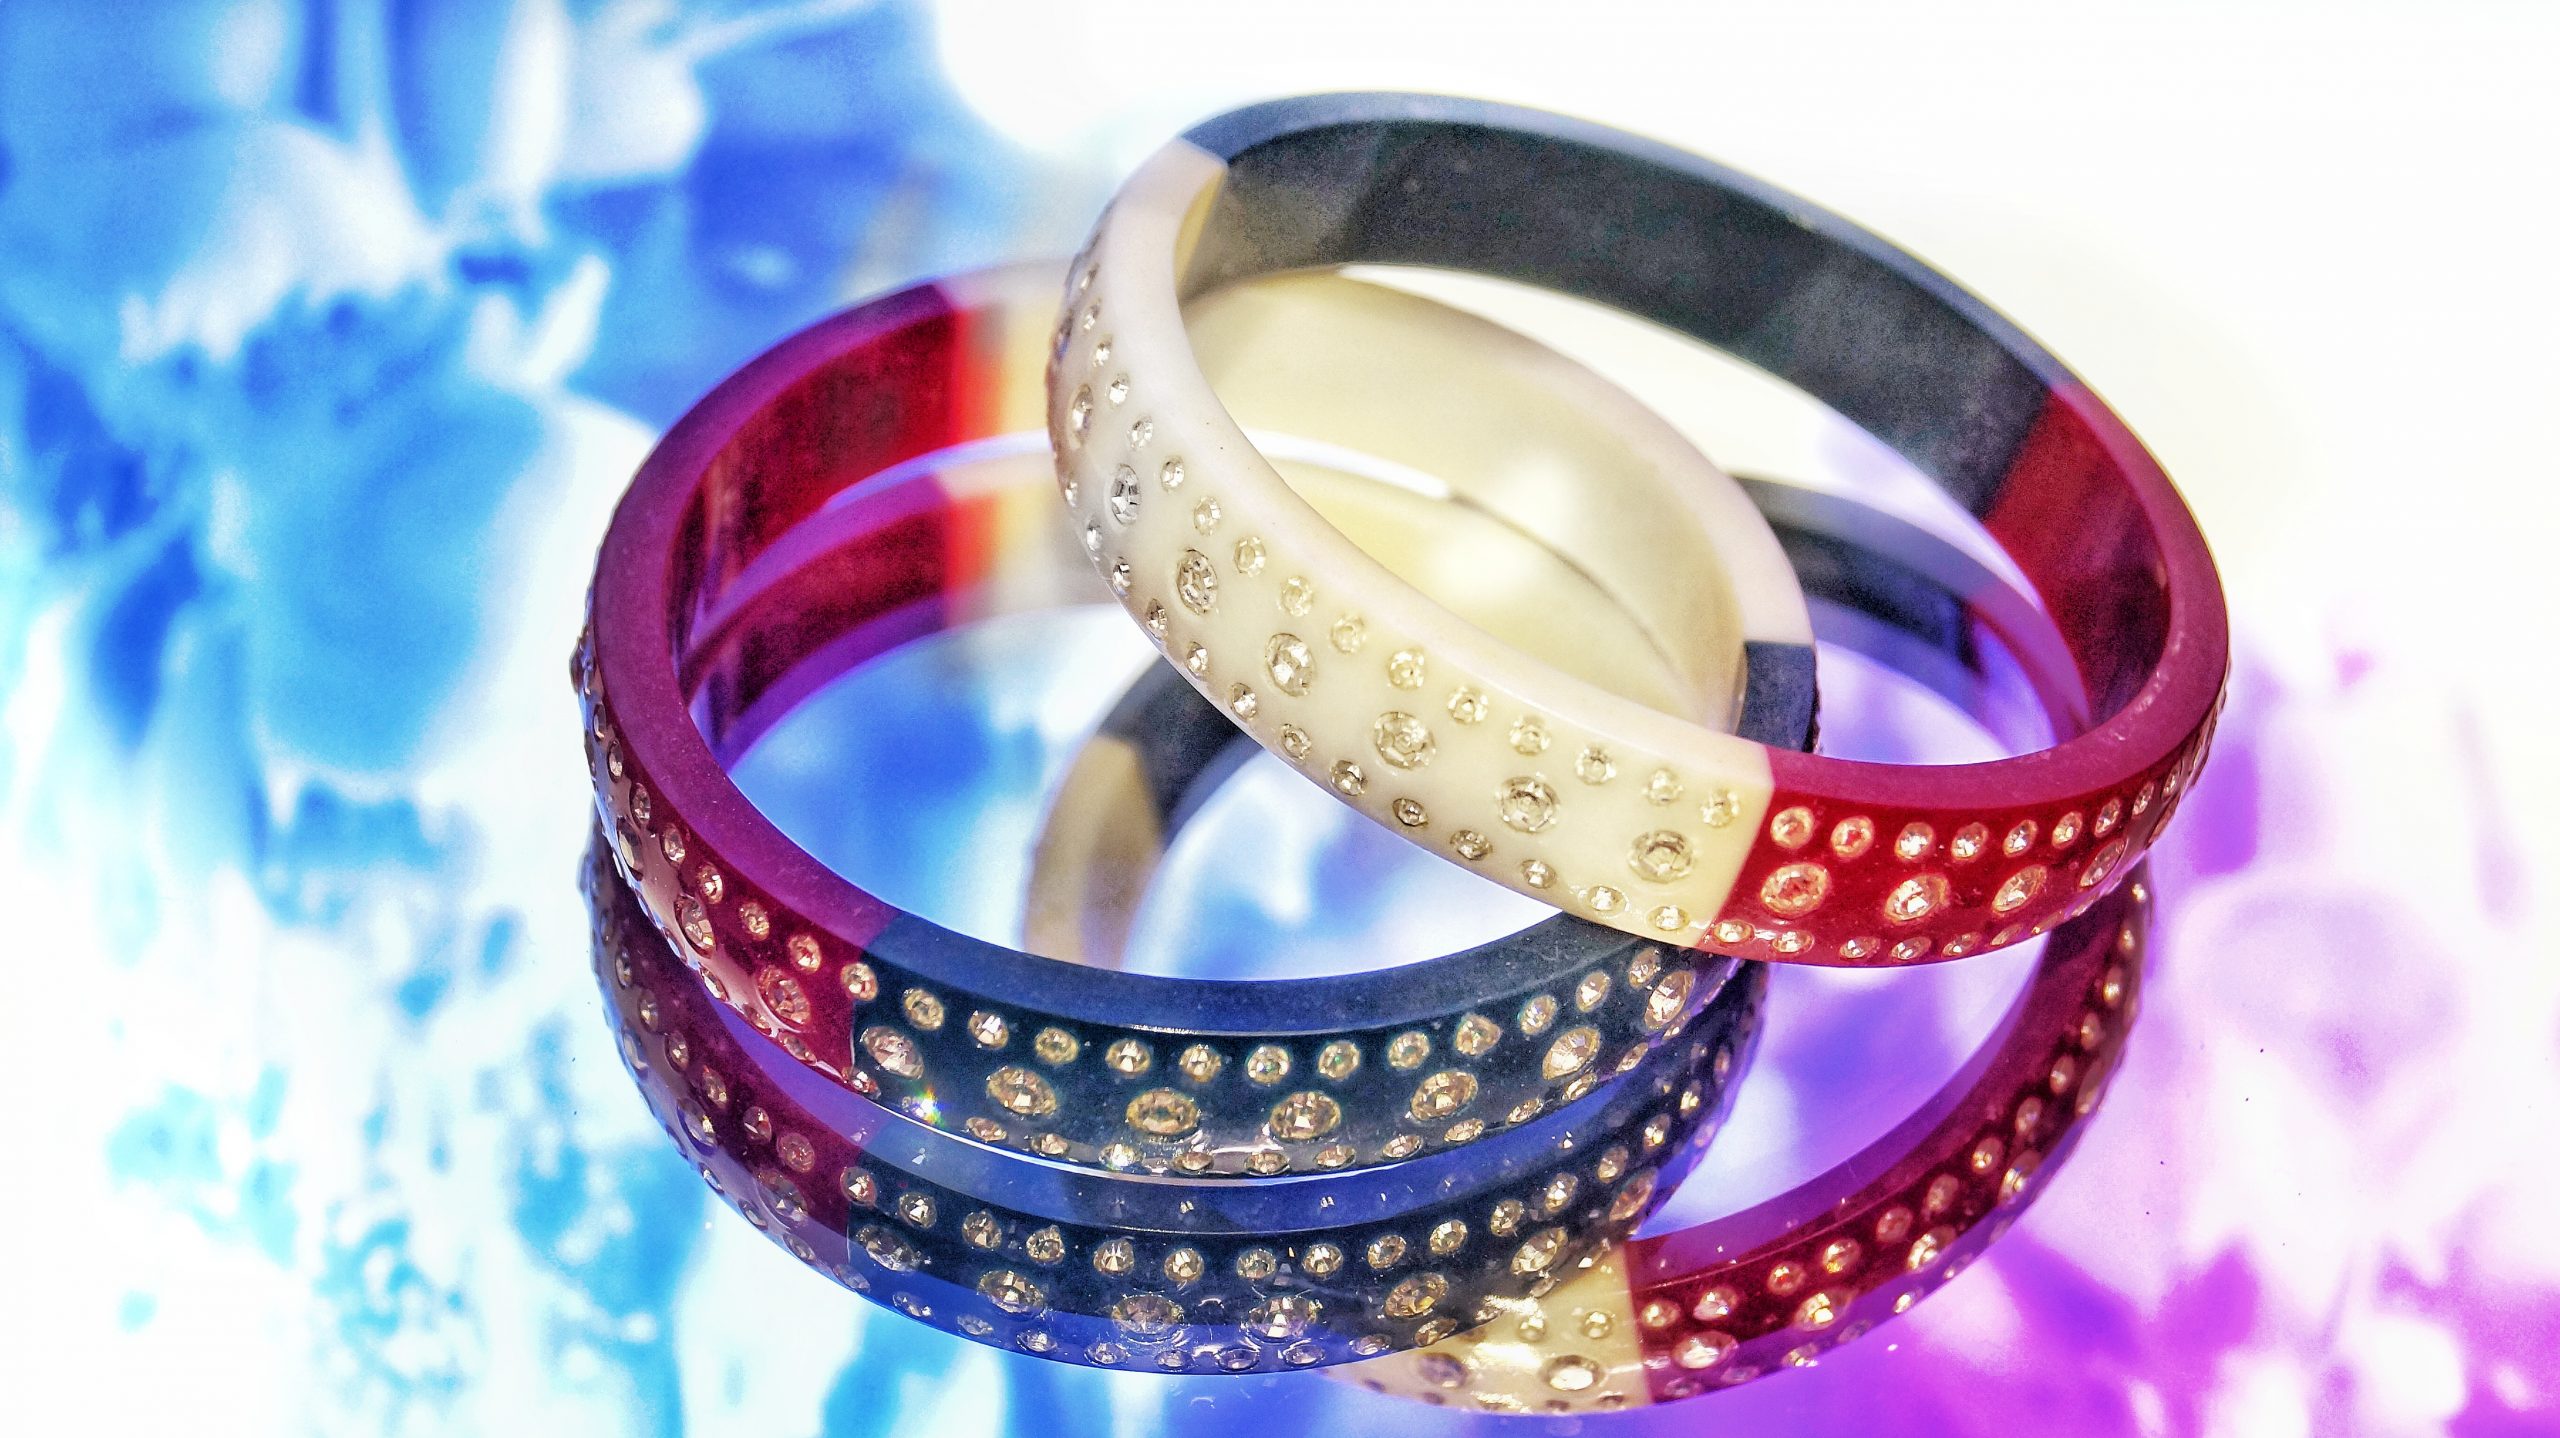 Colored hand bangles